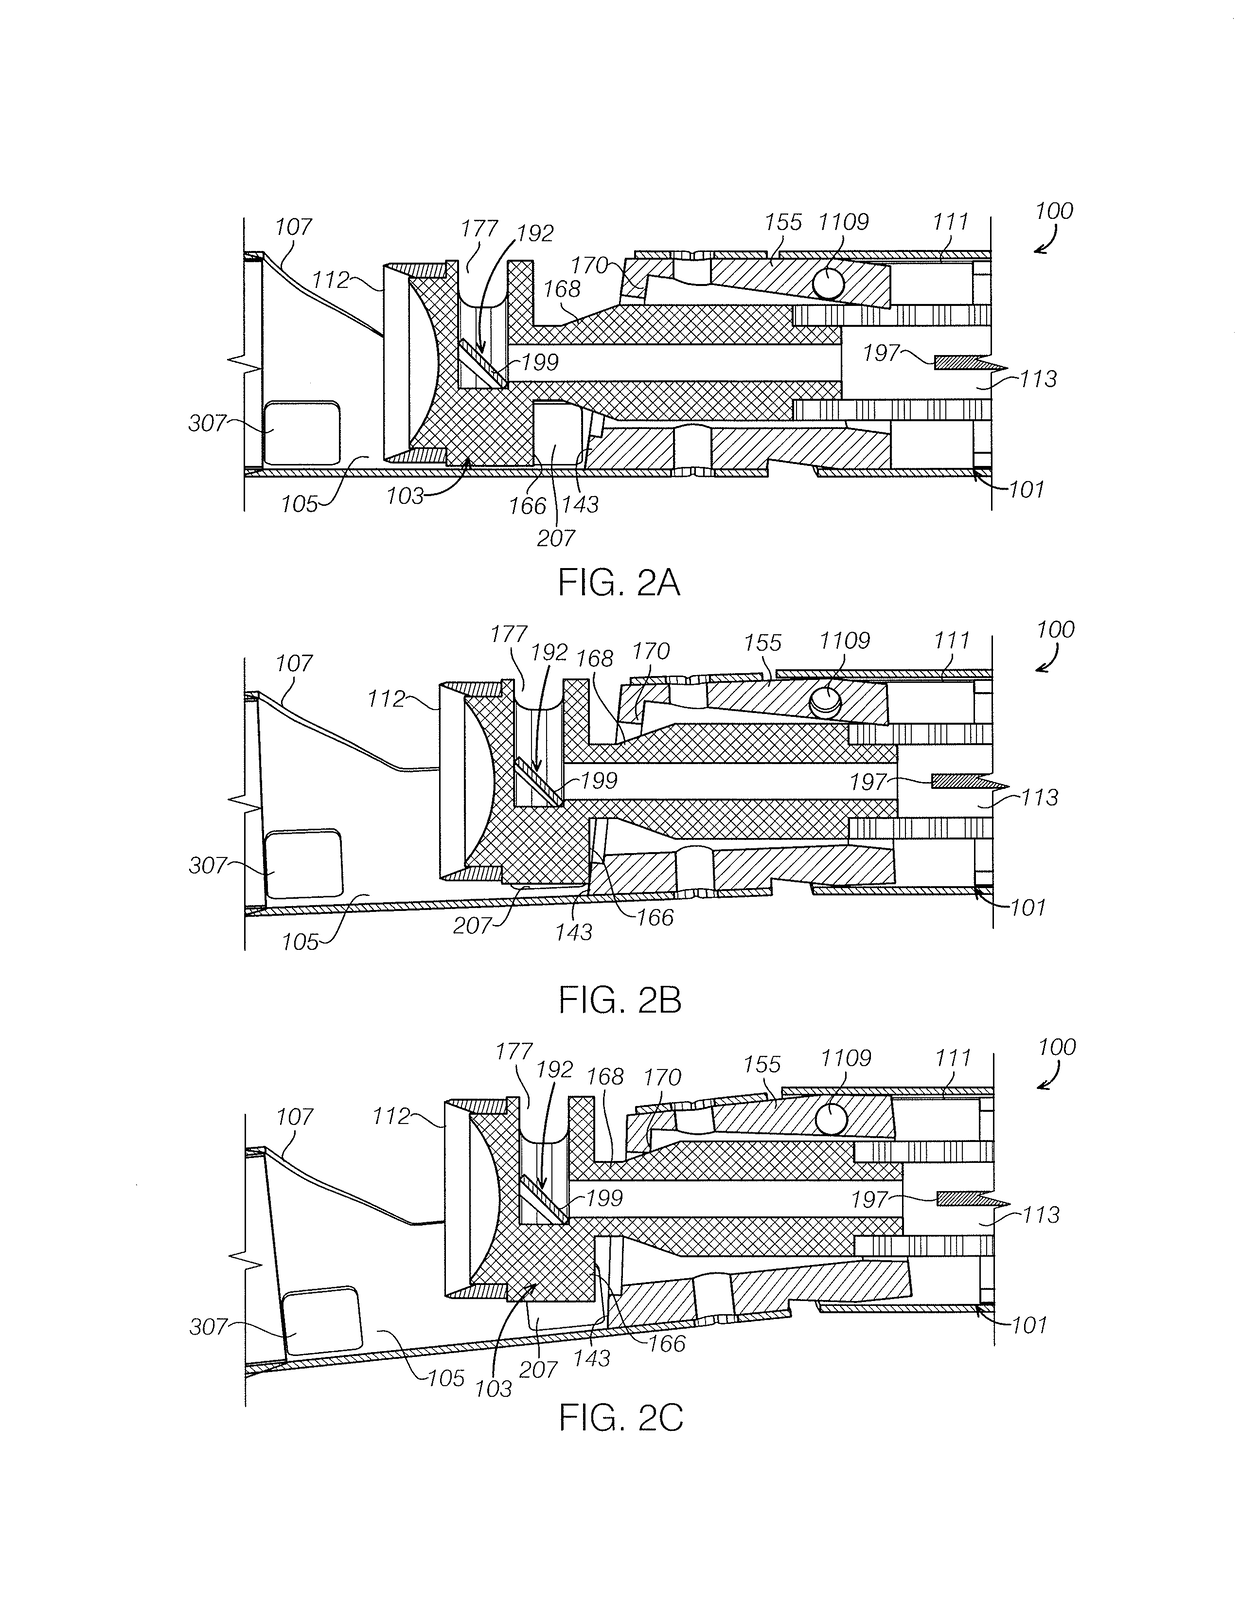 Atherectomy catheters devices having multi-channel bushings